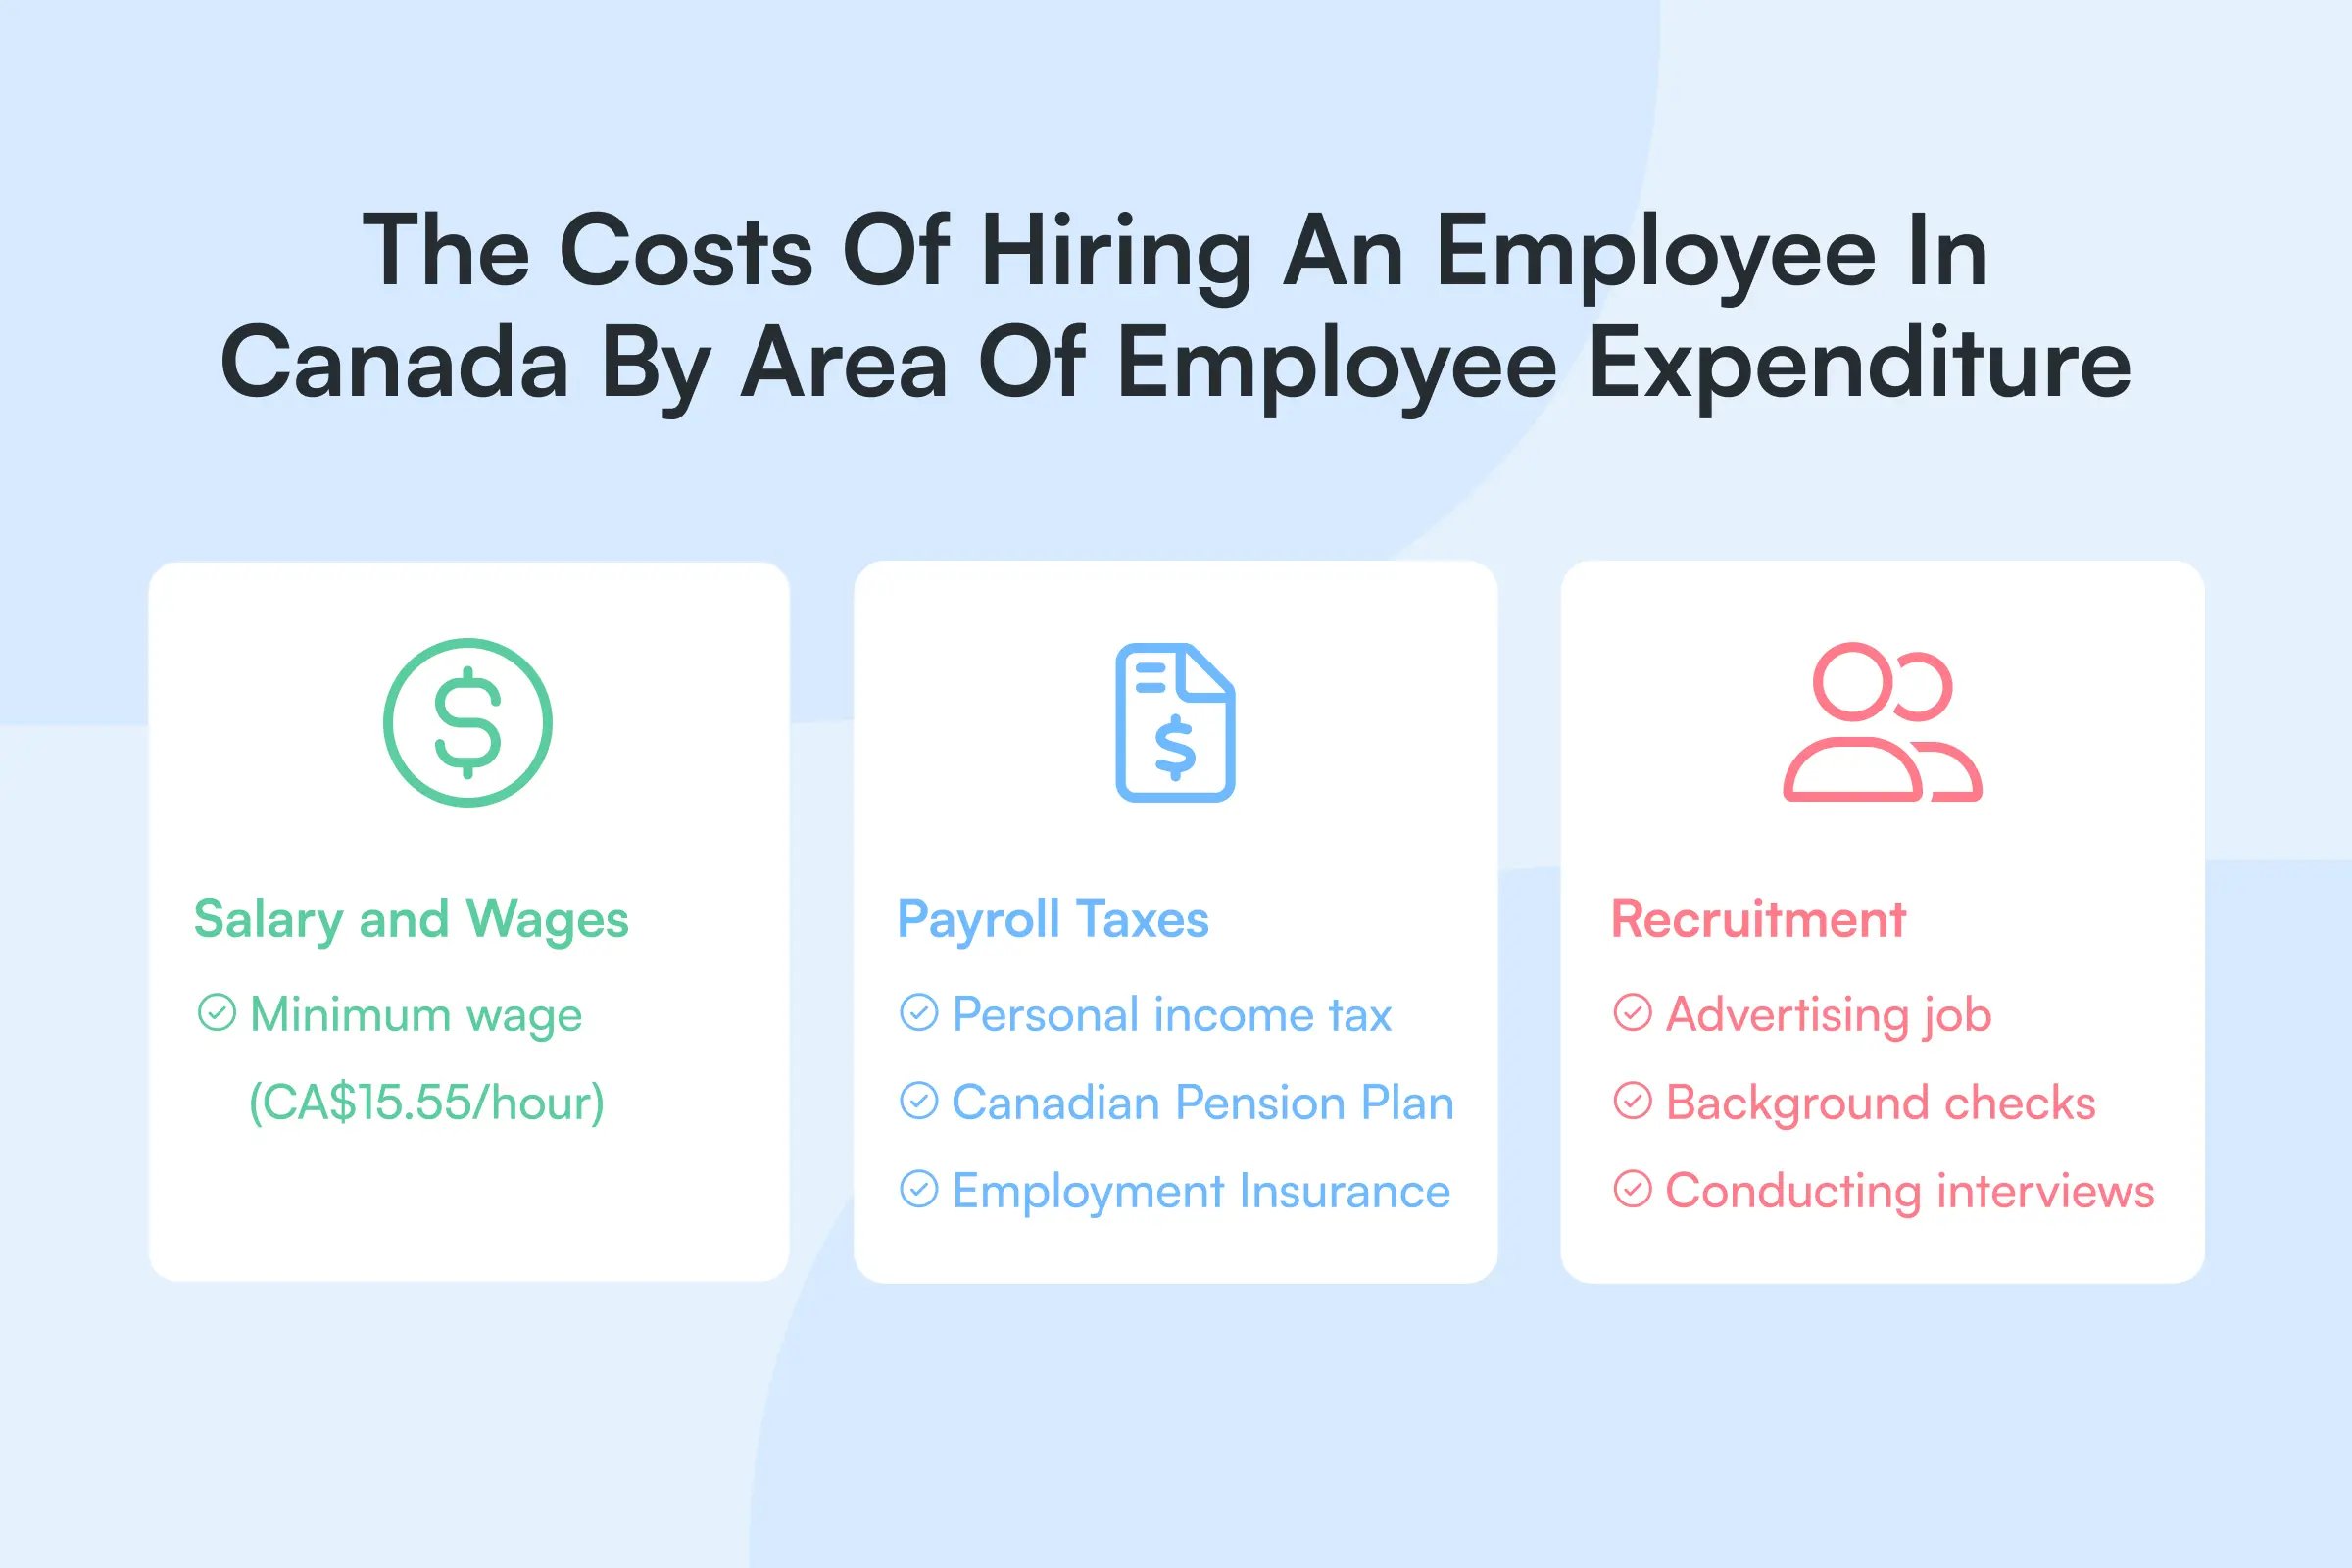 The Costs of Hiring an Employee in Canada by Area of Employee Expenditure